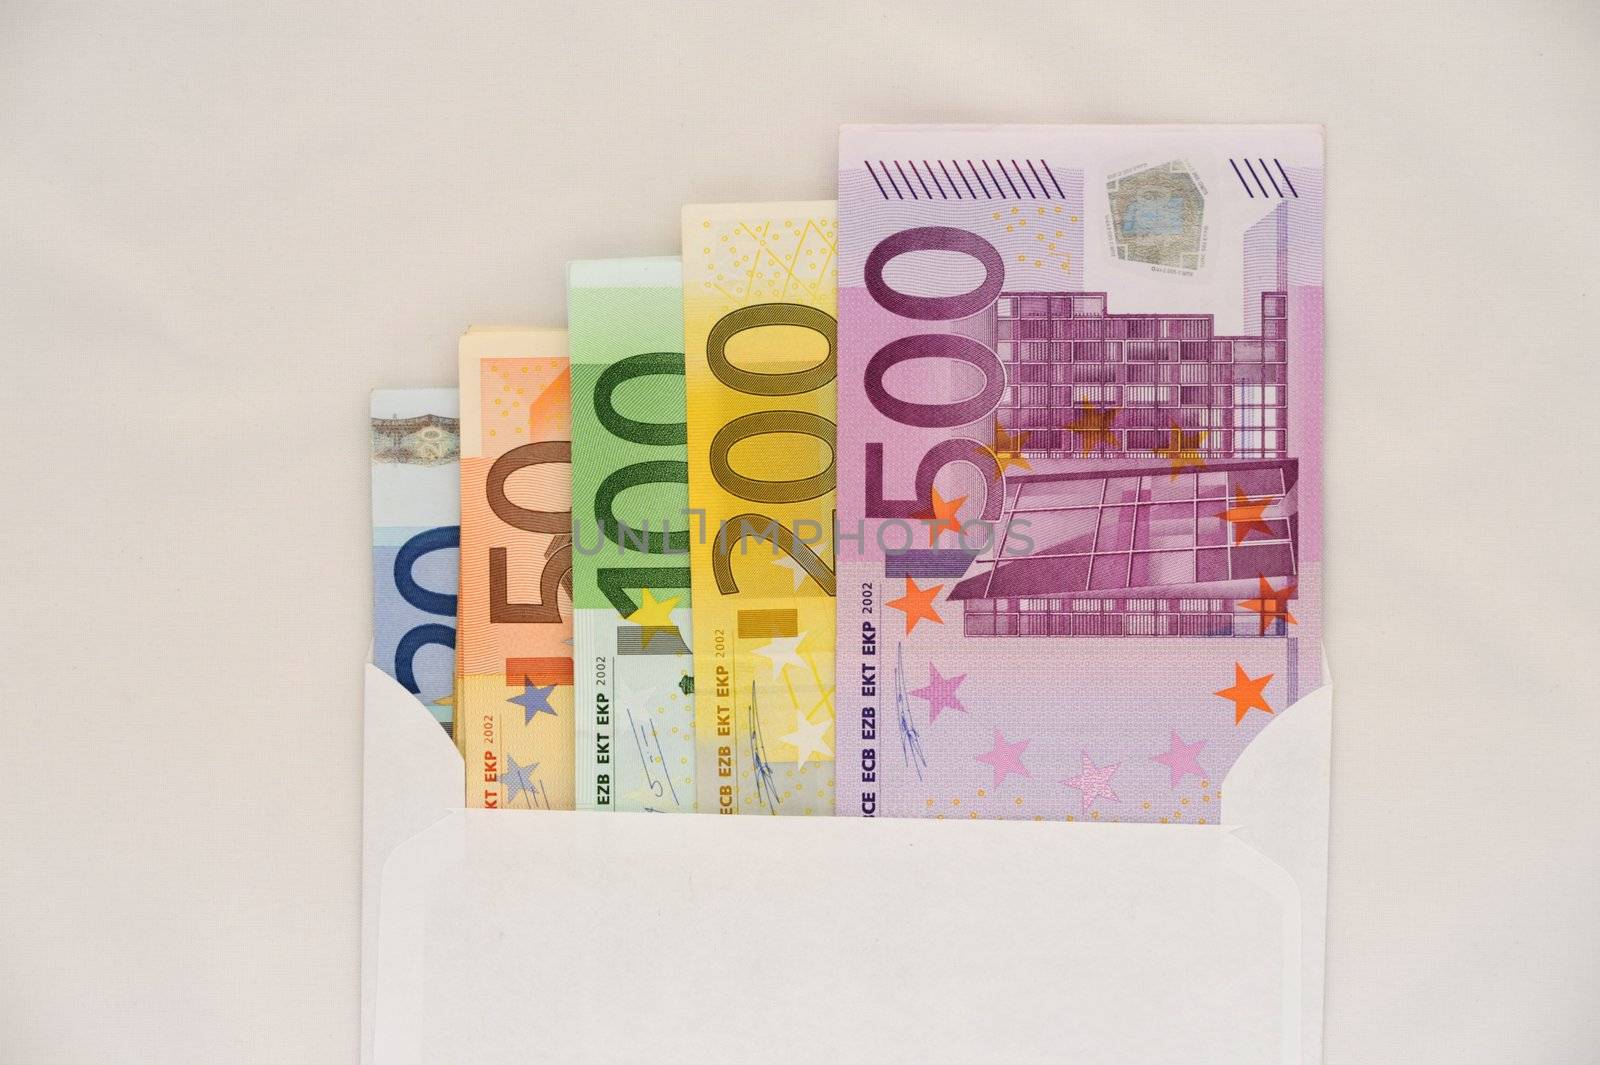 Euro in White Envelope On a White Background.
Concept of a Riches.